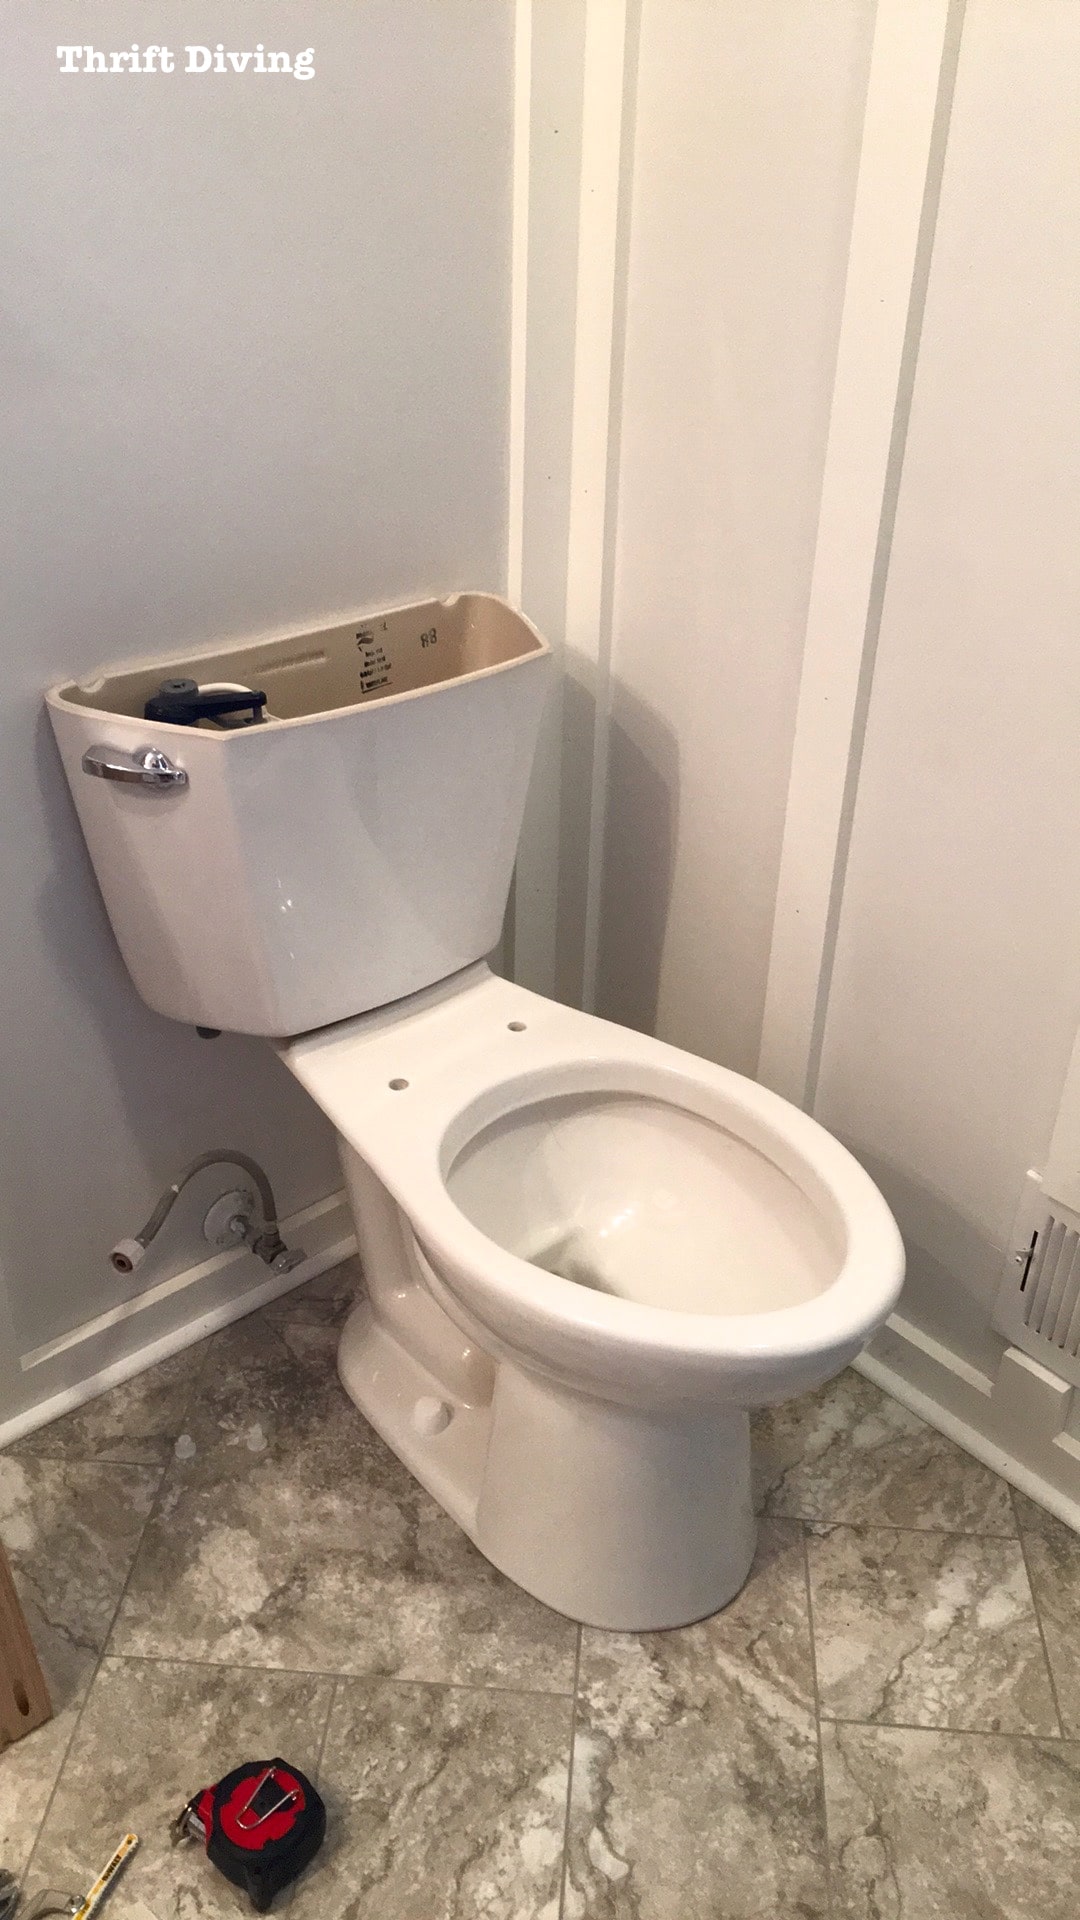 Removing and replacing an old toilet - Thrift Diving